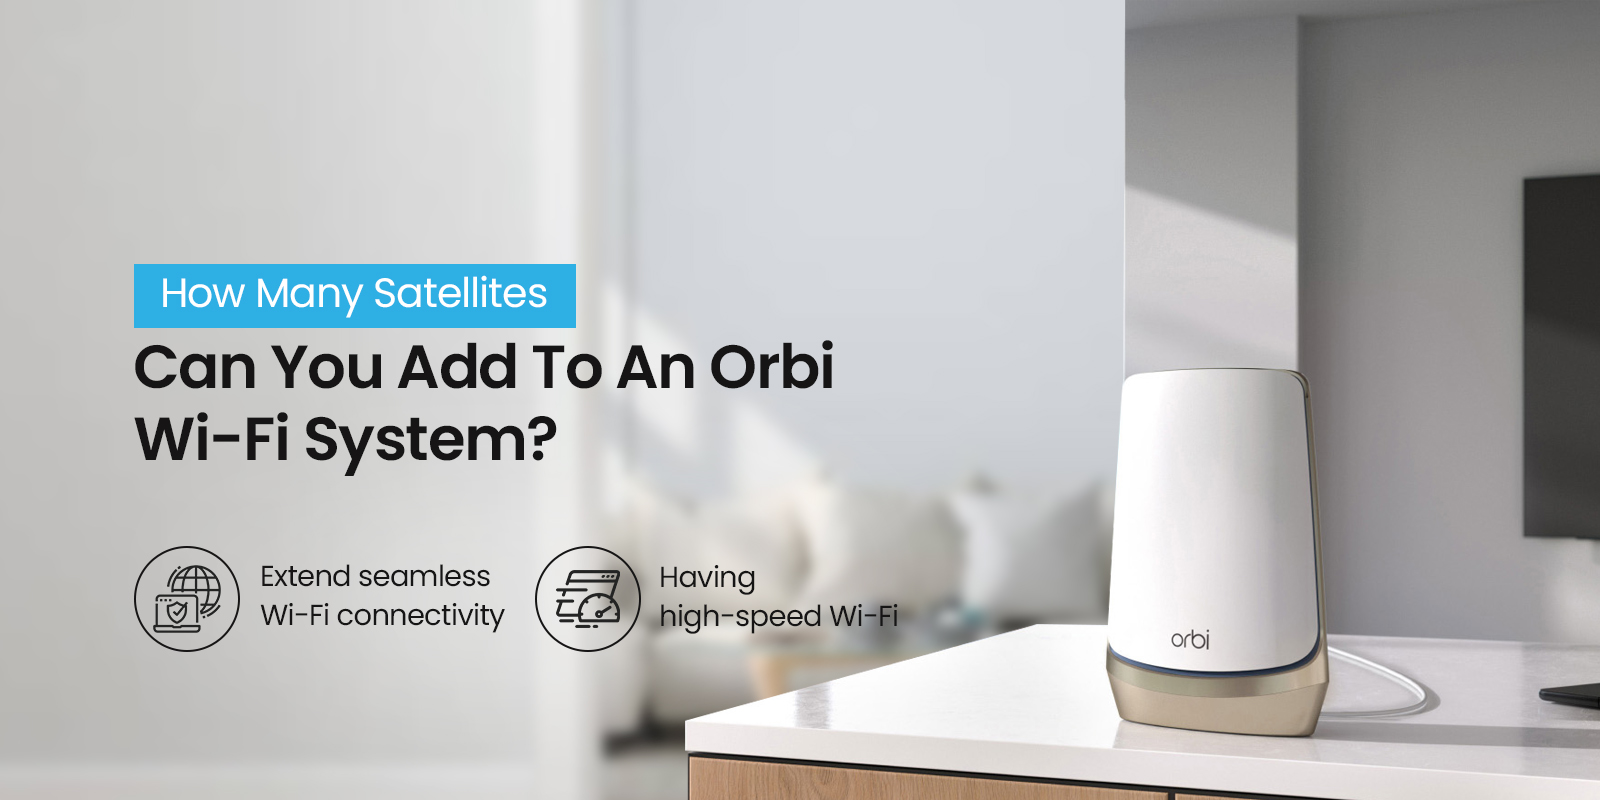 How Many Satellites Can You Add To An Orbi Wi-Fi System